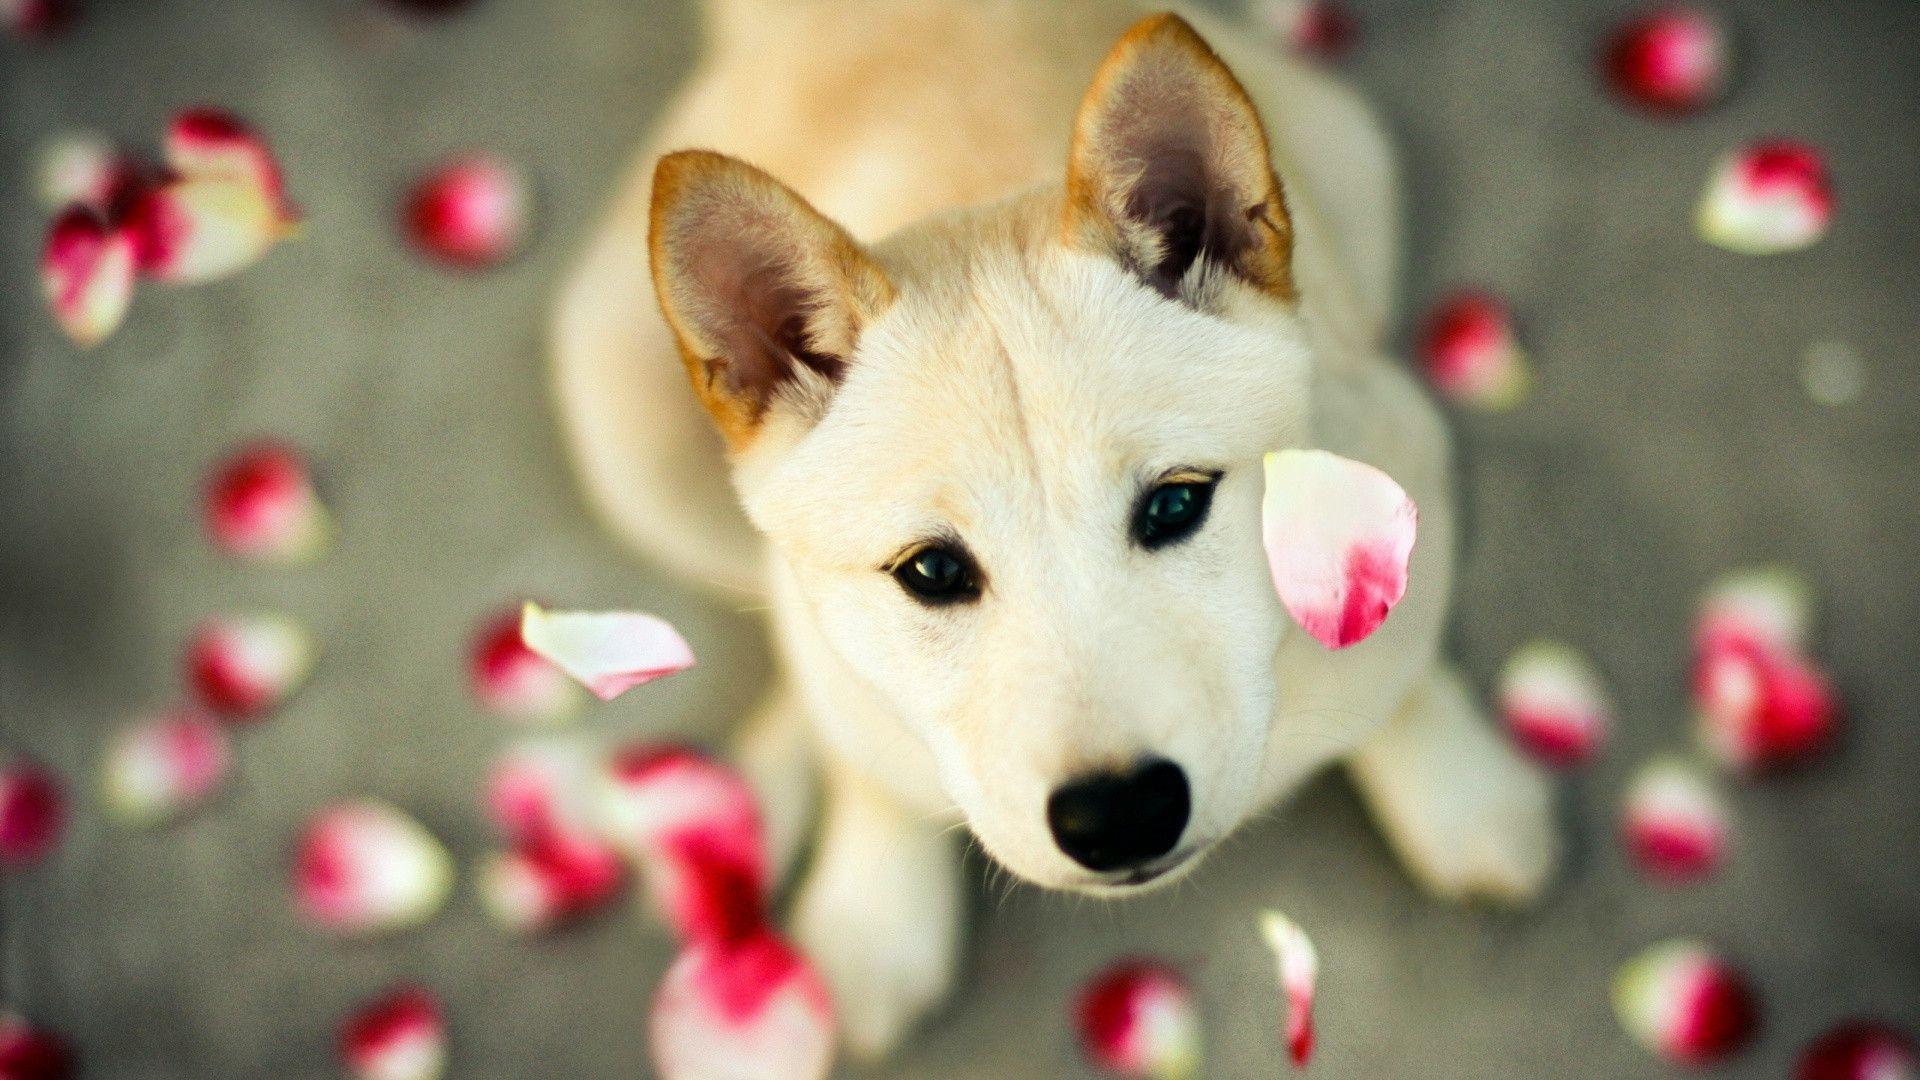 A cute puppy being showered with flower petals.